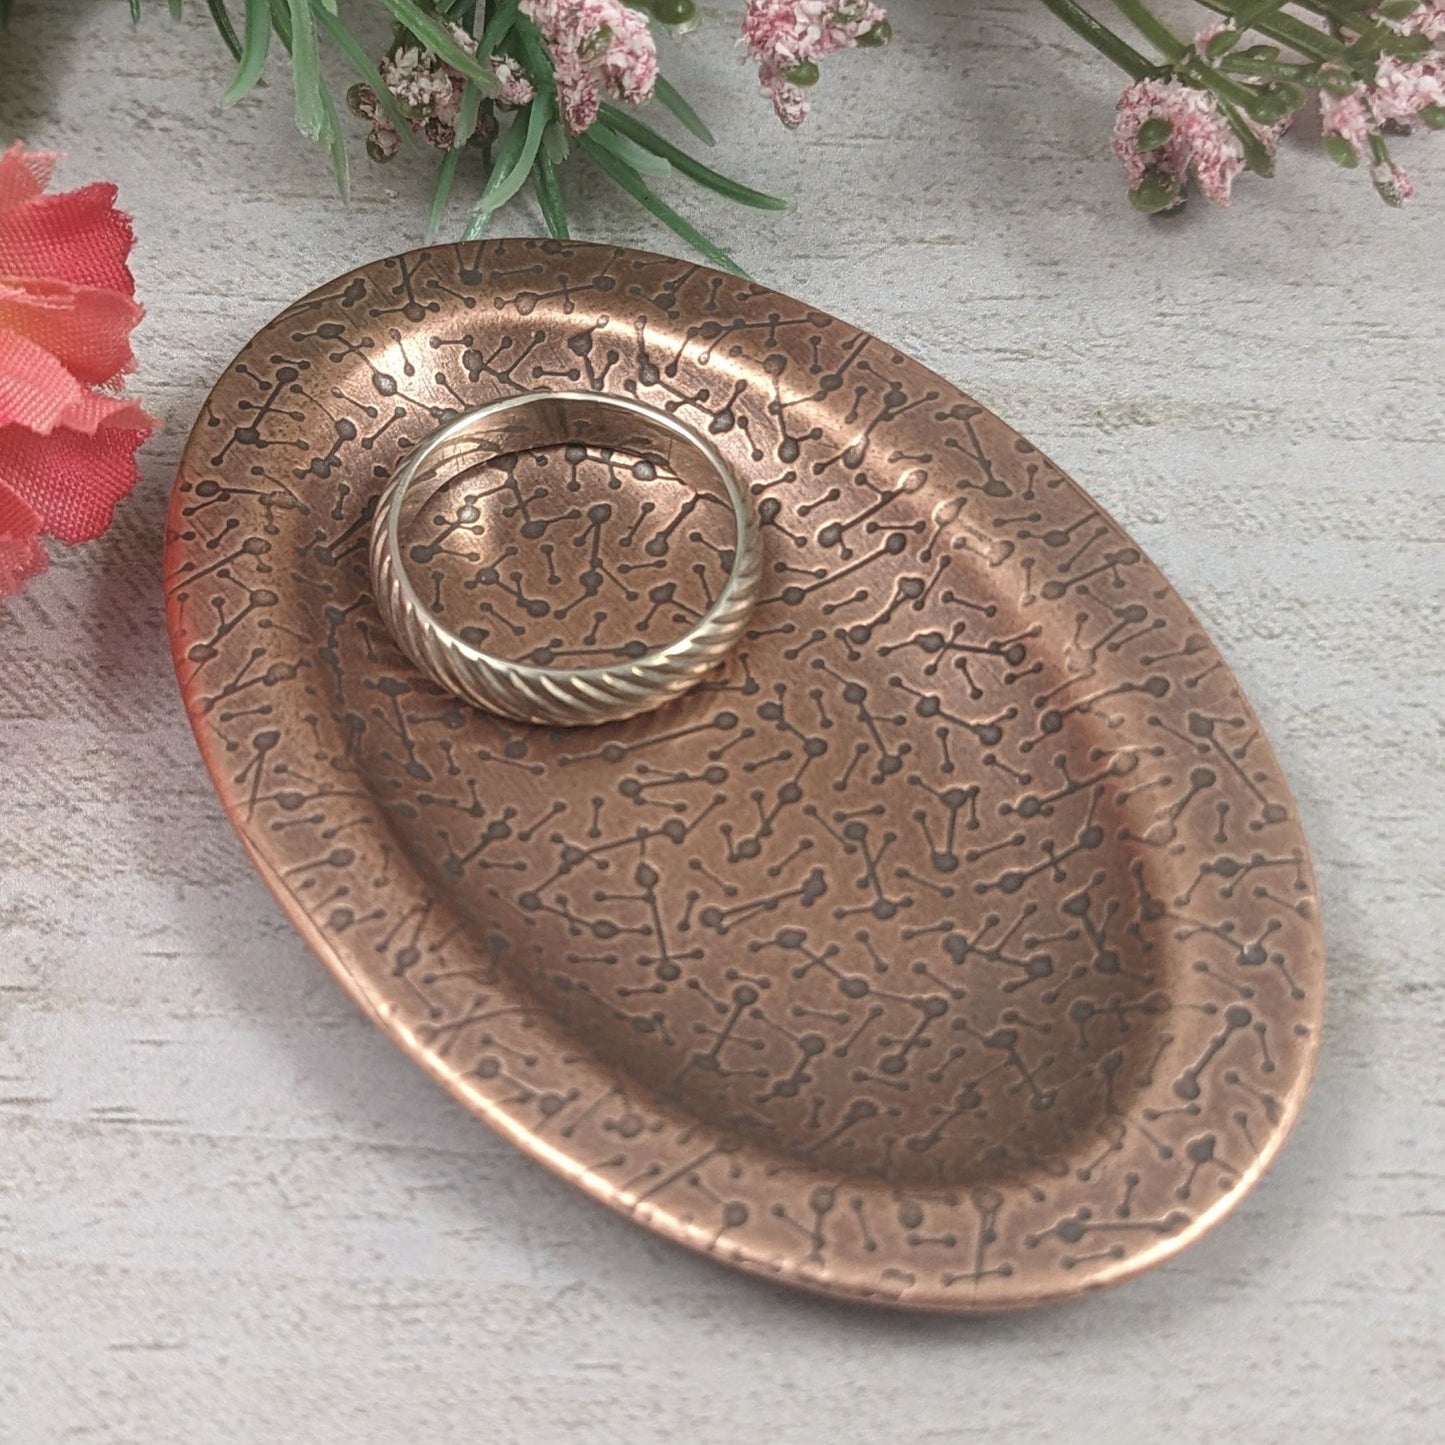 Oval ring dish made of copper. The dish has a shallow bowl with a lip around the edge. It is covered in a pattern meant to represent a meteor shower. The pattern is impressed into the copper and is short lines with small solid circles at the end. The design is oxidized, which means the impressed parts are dark, almost black. Staged with flowers in the background and a ring in the dish.